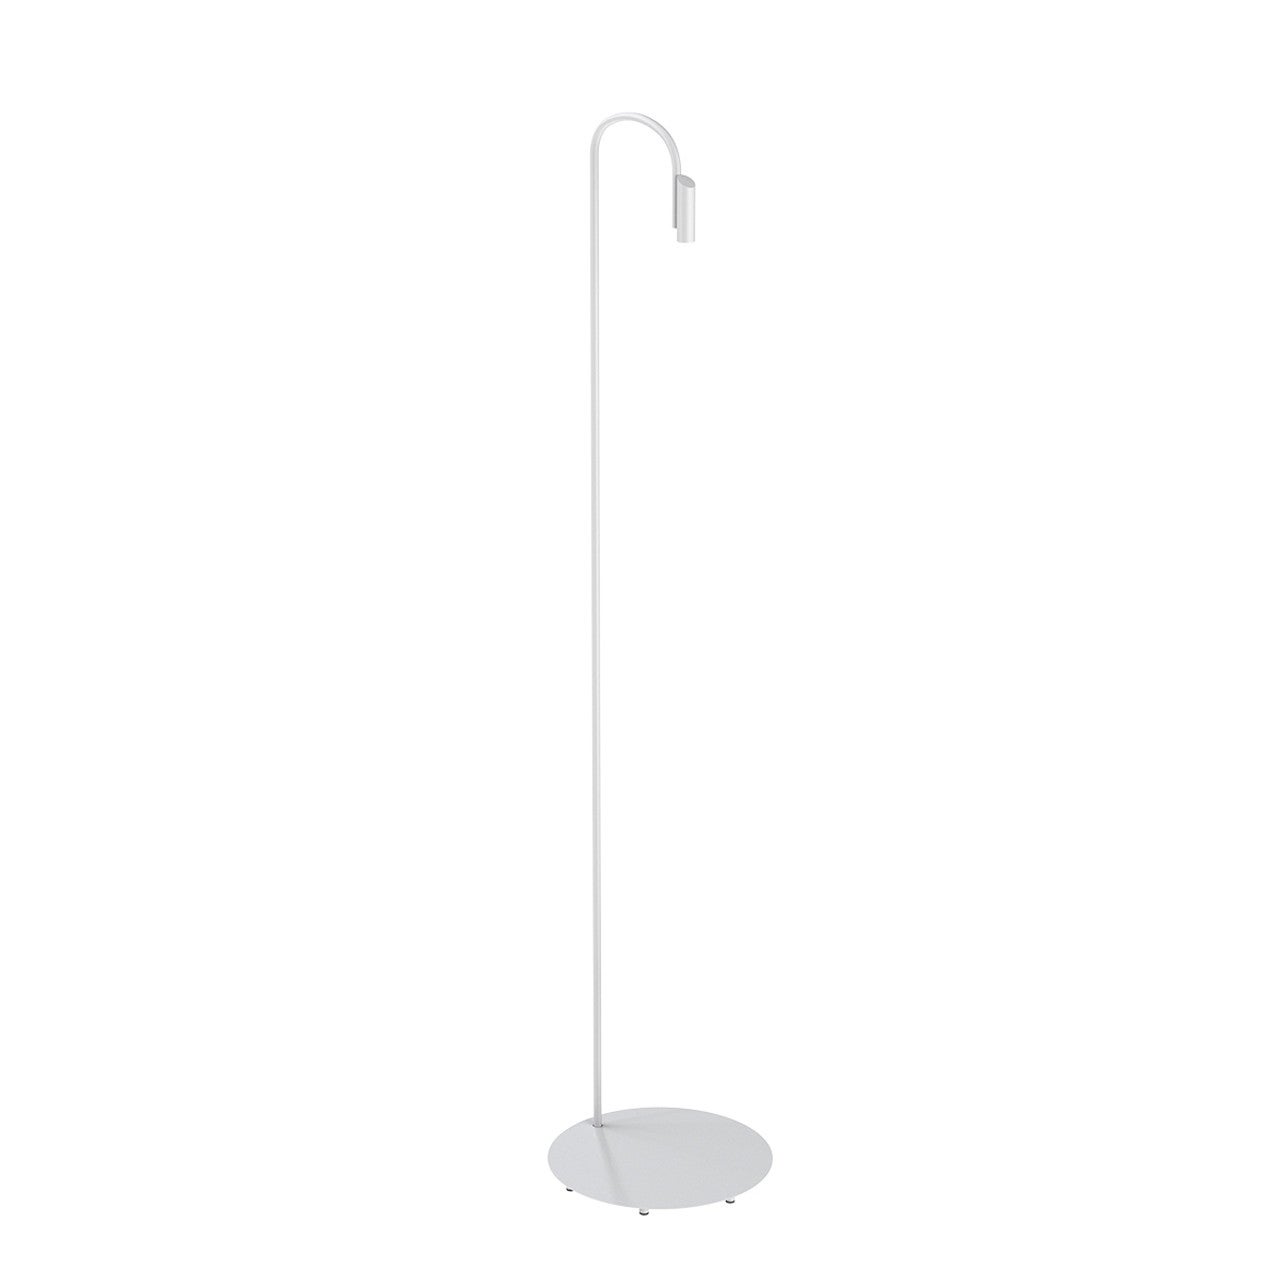 Flos Caule 2700K Model 5 Outdoor Floor Lamp in White with Regular Shade For Sale